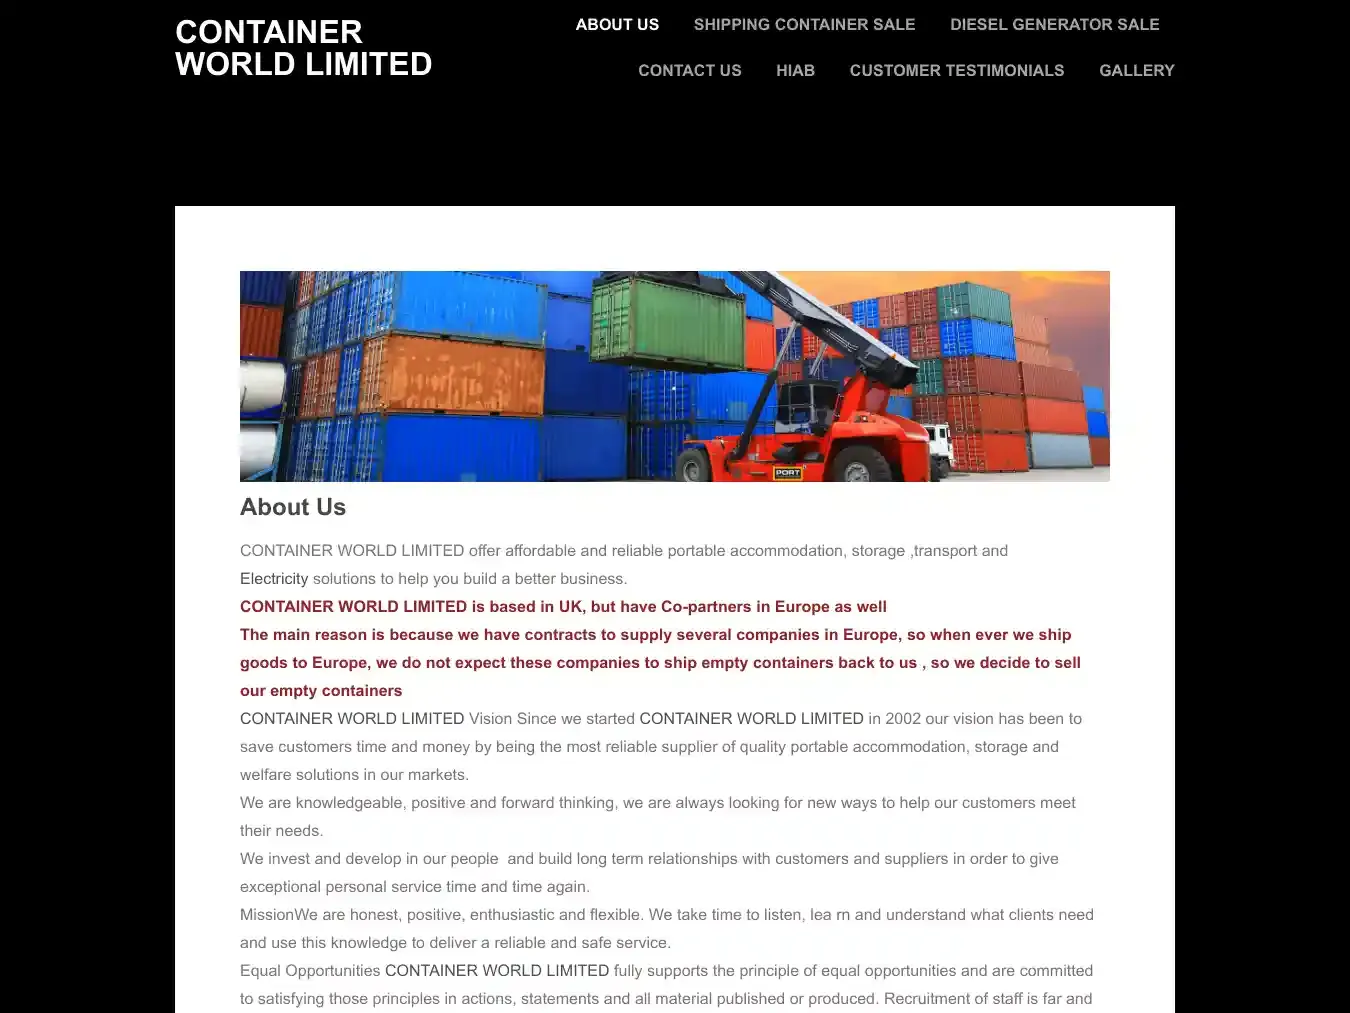 Buyshippingcontainers.co.uk Fraudulent Non-Delivery website.